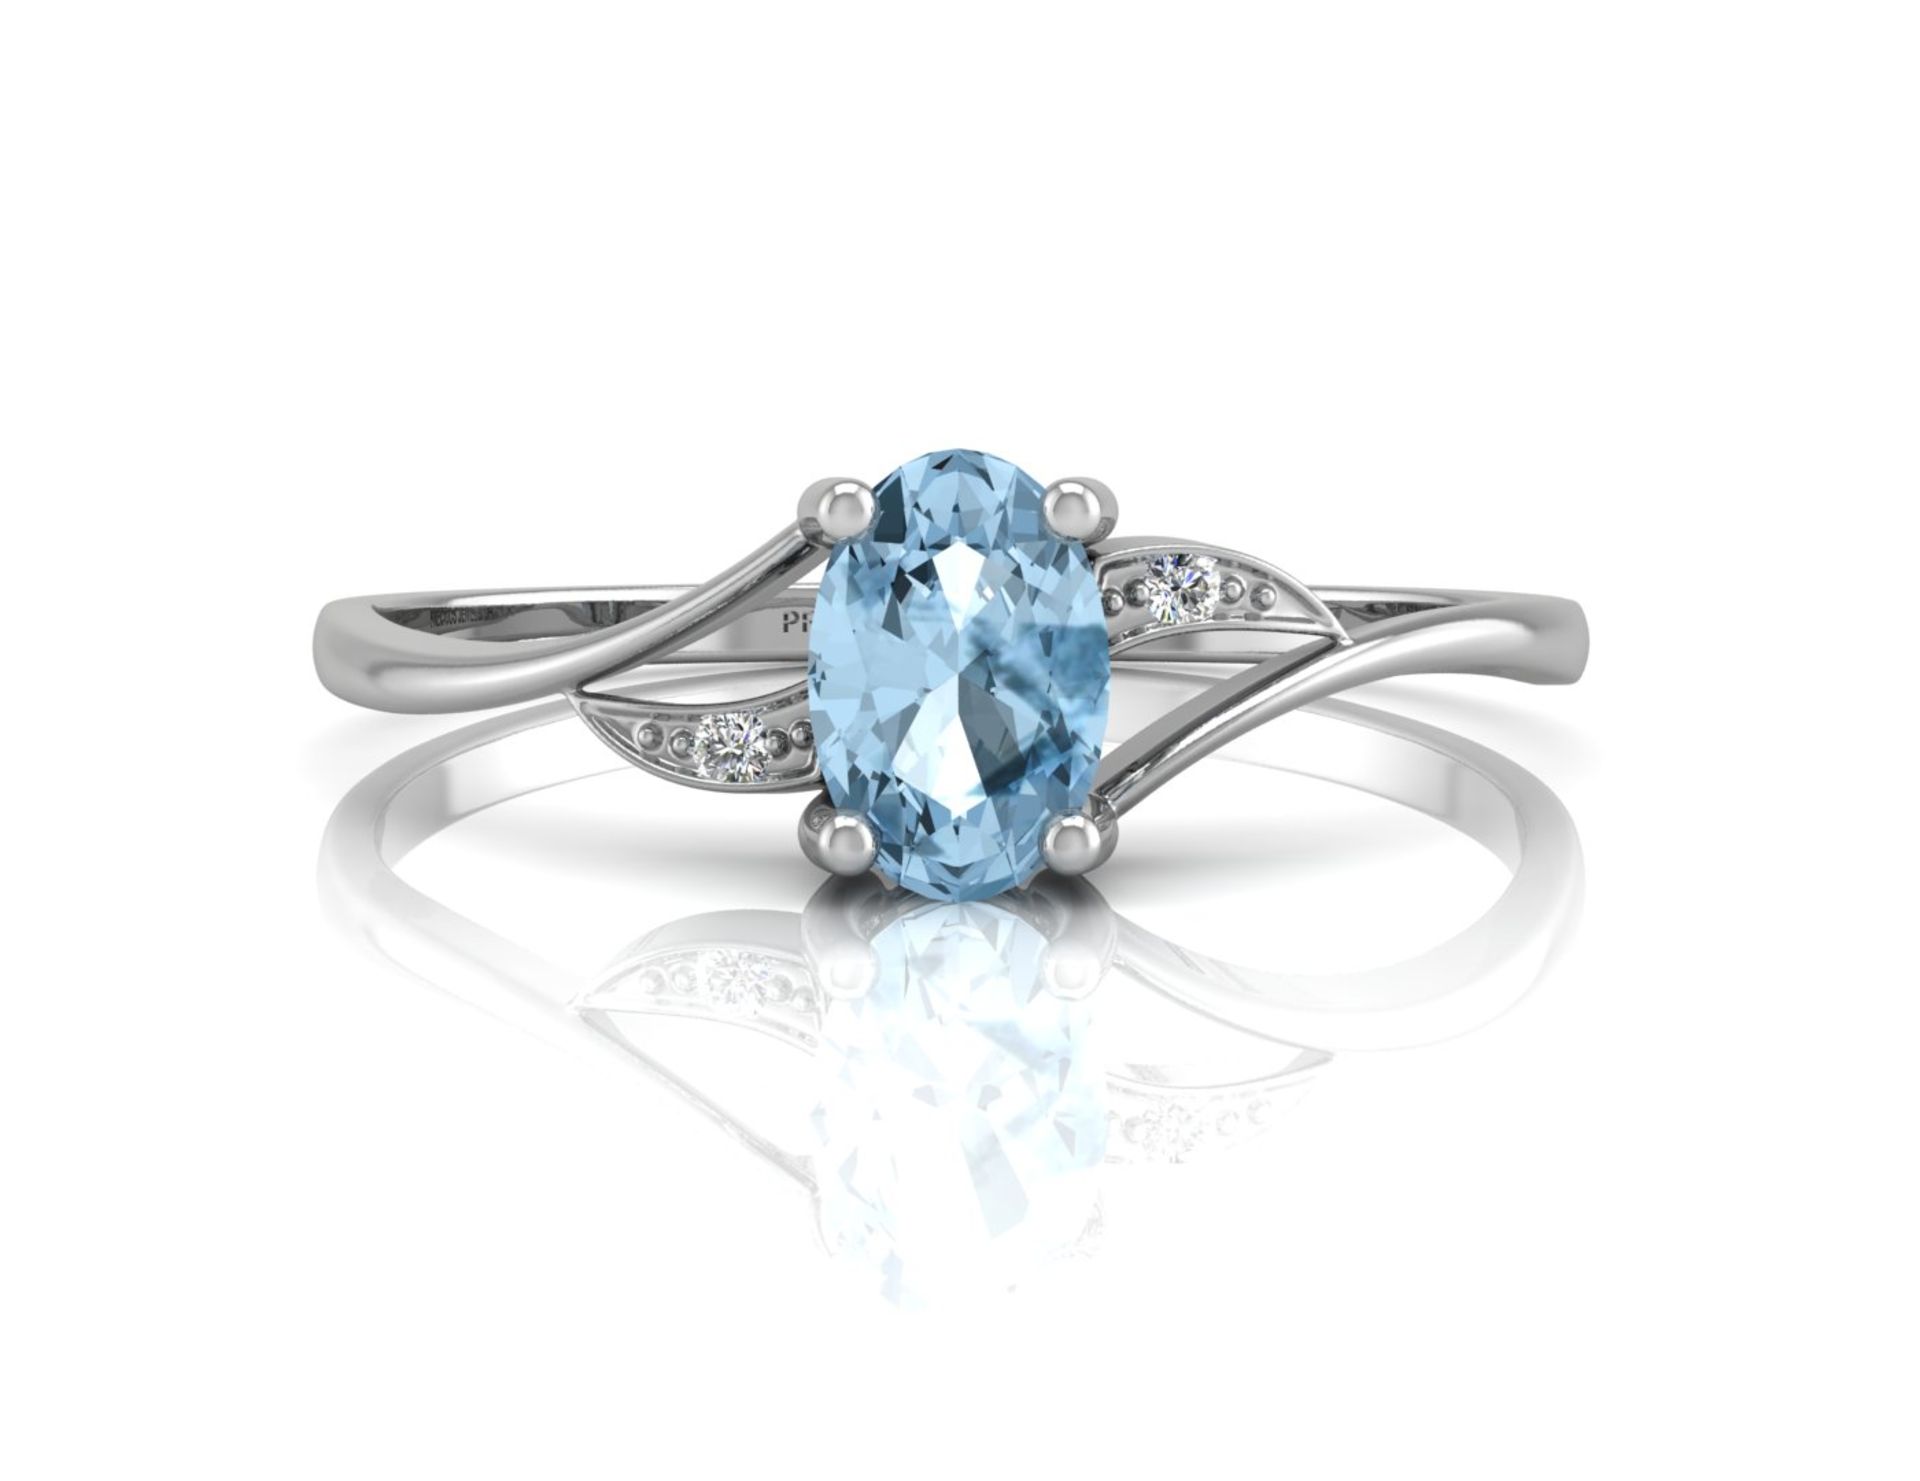 9ct White Gold Diamond And Blue Topaz Ring 0.01 Carats - Valued by GIE £745.00 - 9ct White Gold - Image 4 of 5